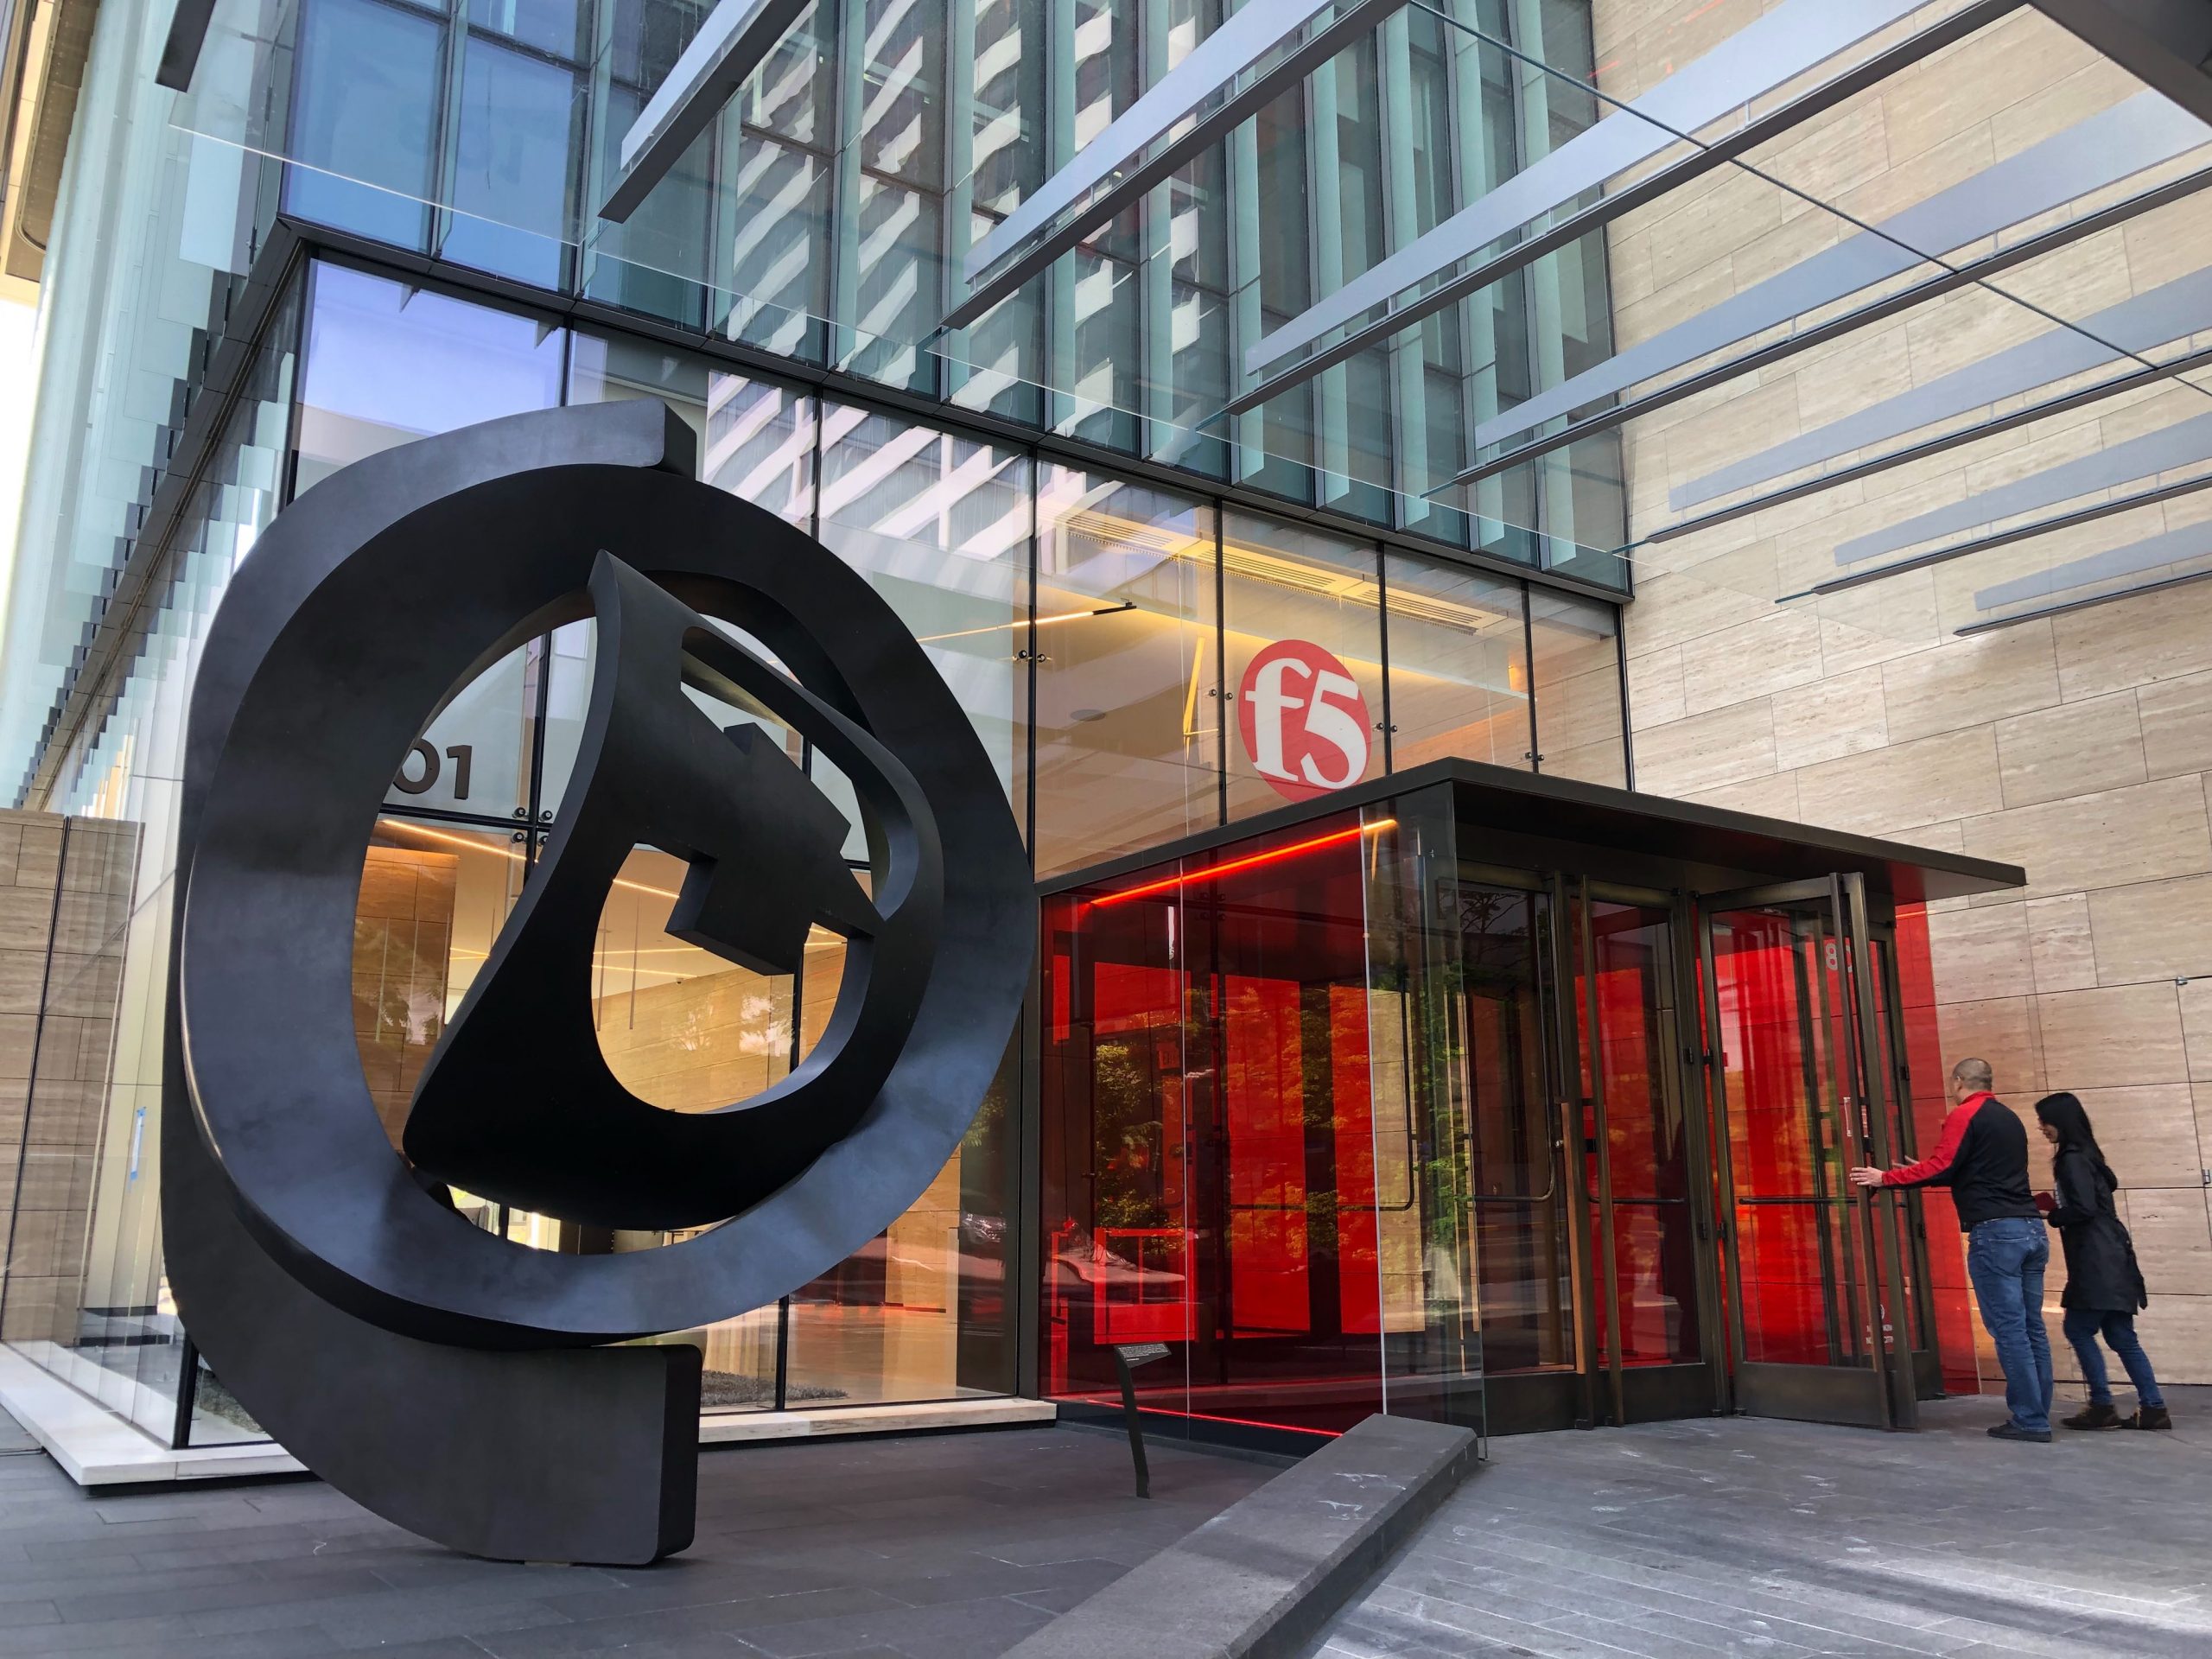 F5 Networks beats quarterly expectations as revenue up 11% to $645M, but stock dips 5%